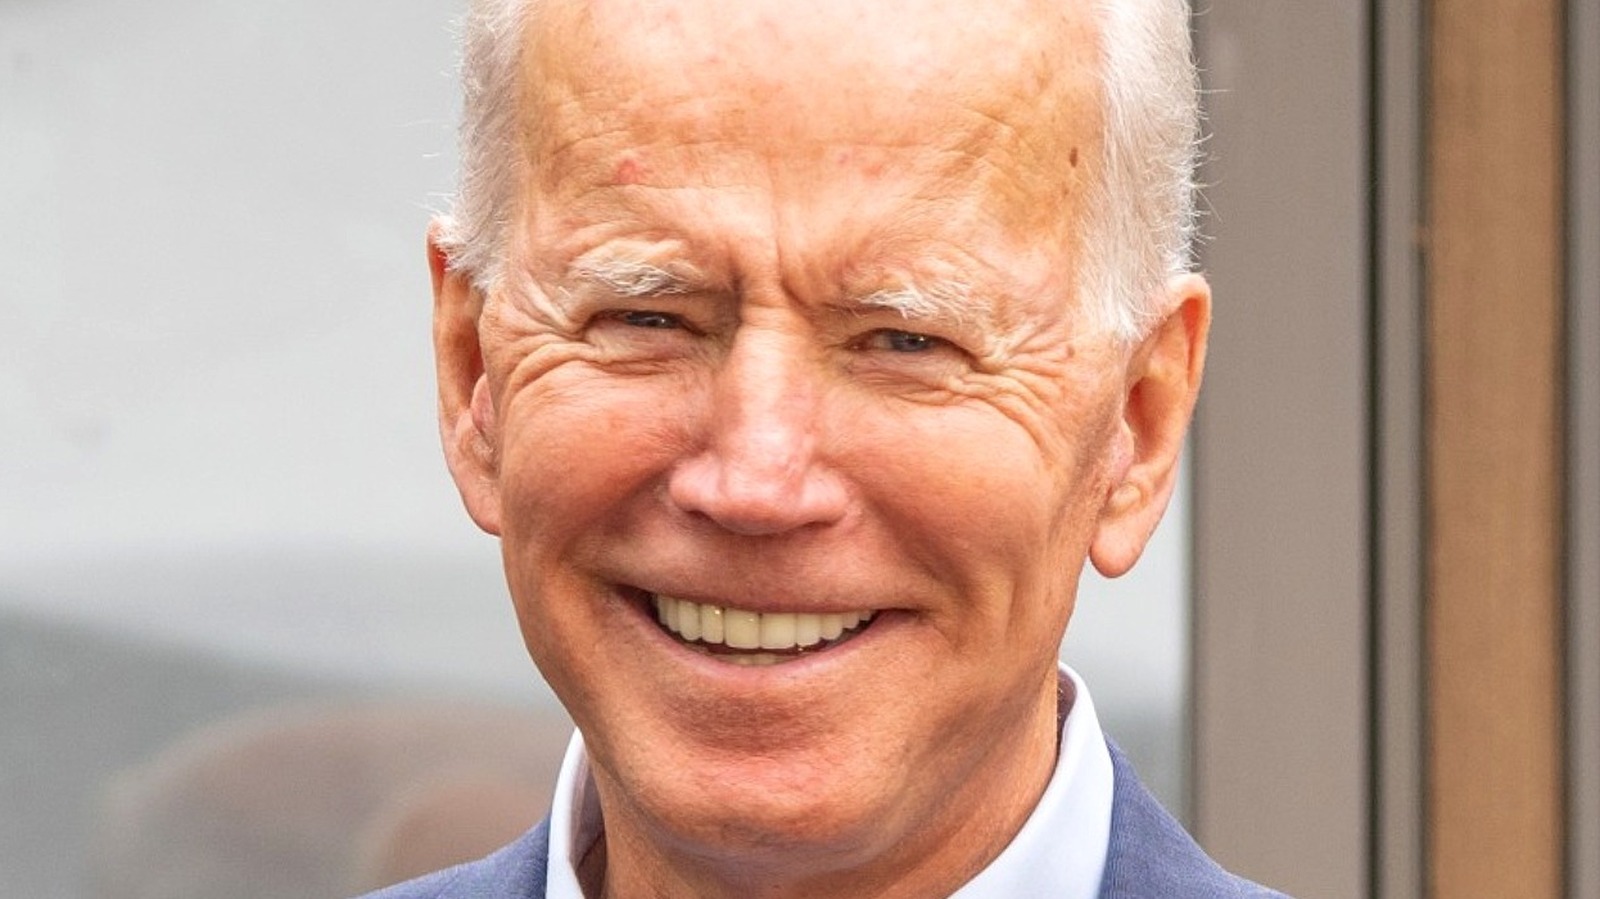 The Big Change President Biden Wants To Make To Nutrition Labels